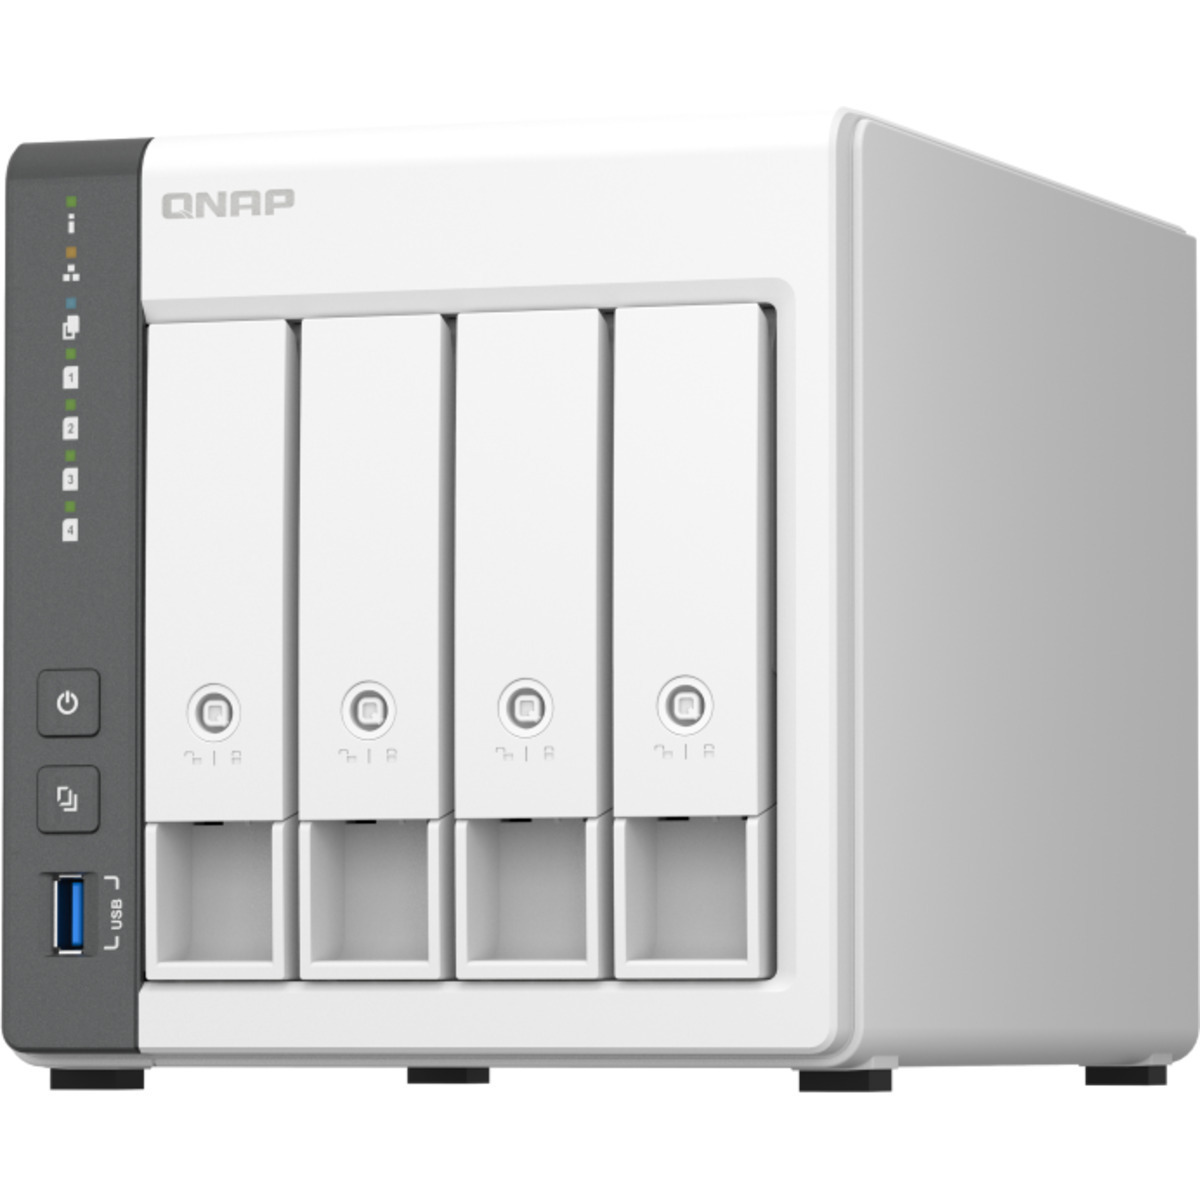 QNAP TS-433 18tb 4-Bay Desktop Personal / Basic Home / Small Office NAS - Network Attached Storage Device 3x6tb Seagate IronWolf Pro ST6000NT001 3.5 7200rpm SATA 6Gb/s HDD NAS Class Drives Installed - Burn-In Tested TS-433